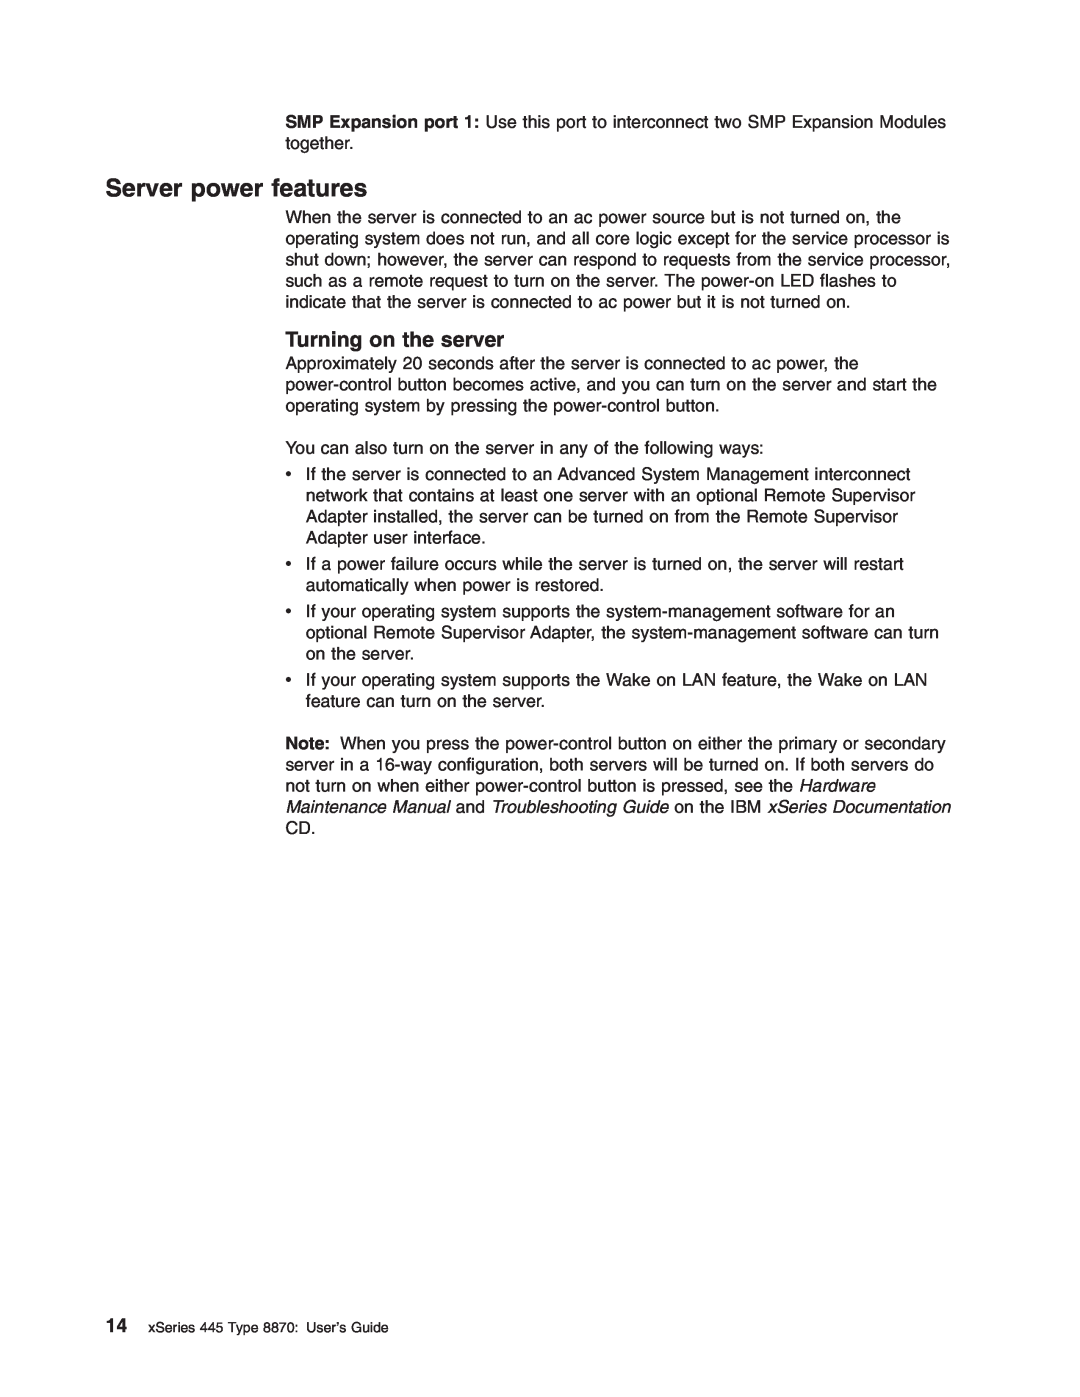 IBM 8870 manual Server power features, Turning on the server 